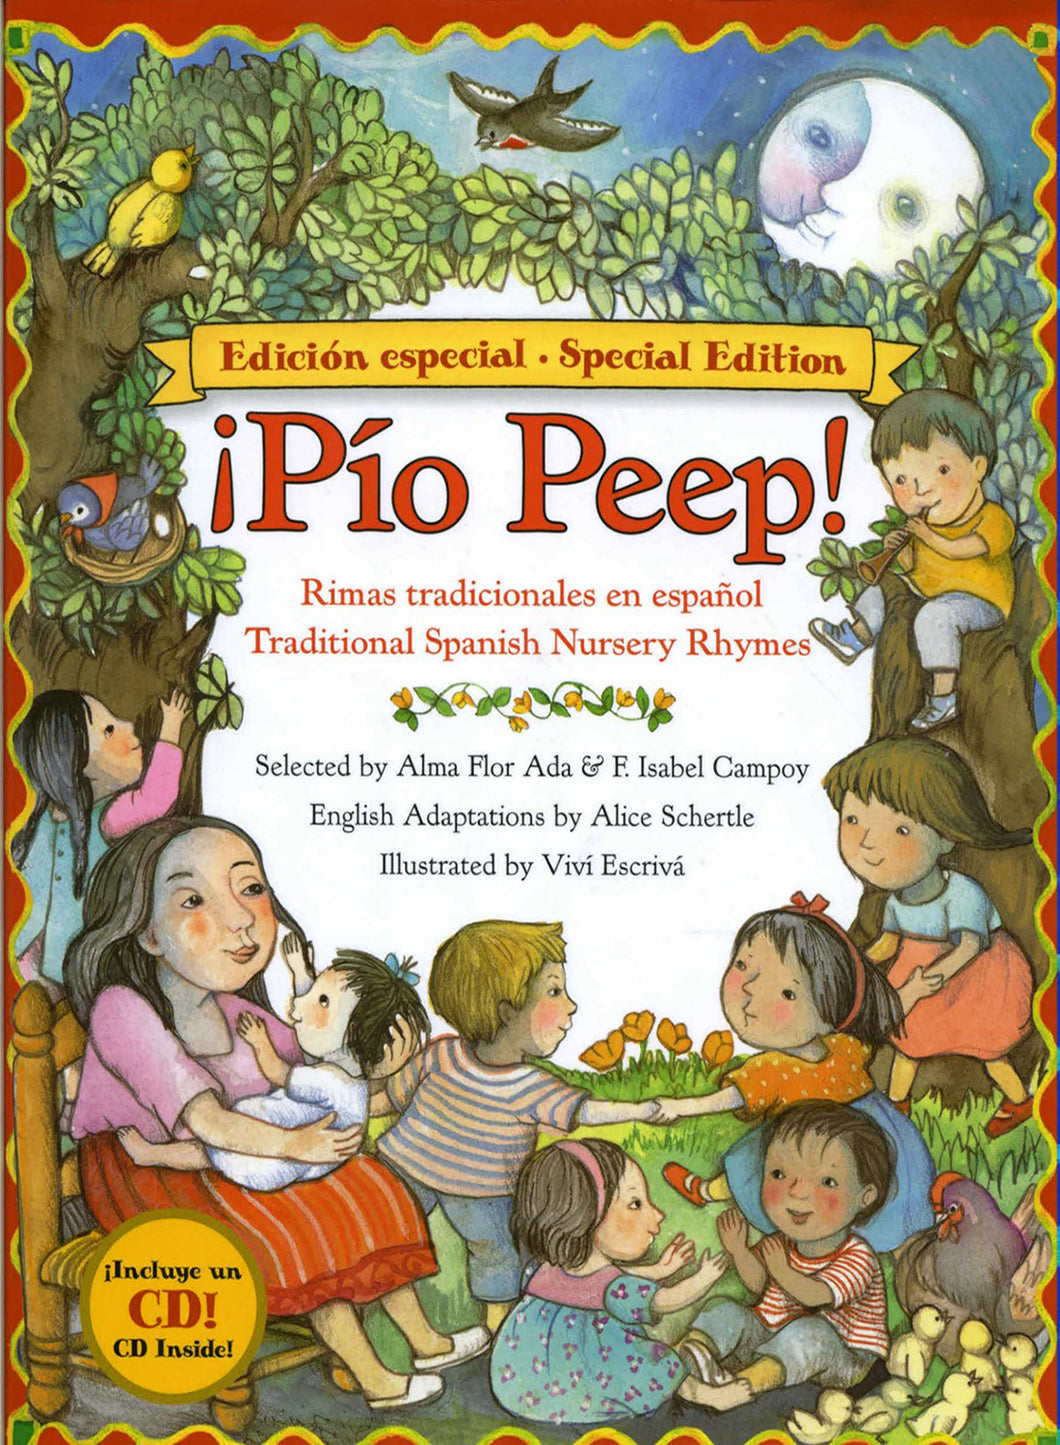 ¡Pío Peep! Traditional Spanish Nursery Rhymes by Alma Flor Ada, F. Isabel Campoy & Alice Schertle / Hardcover or Paperback - NEW BOOK (Bilingual - English + Spanish)